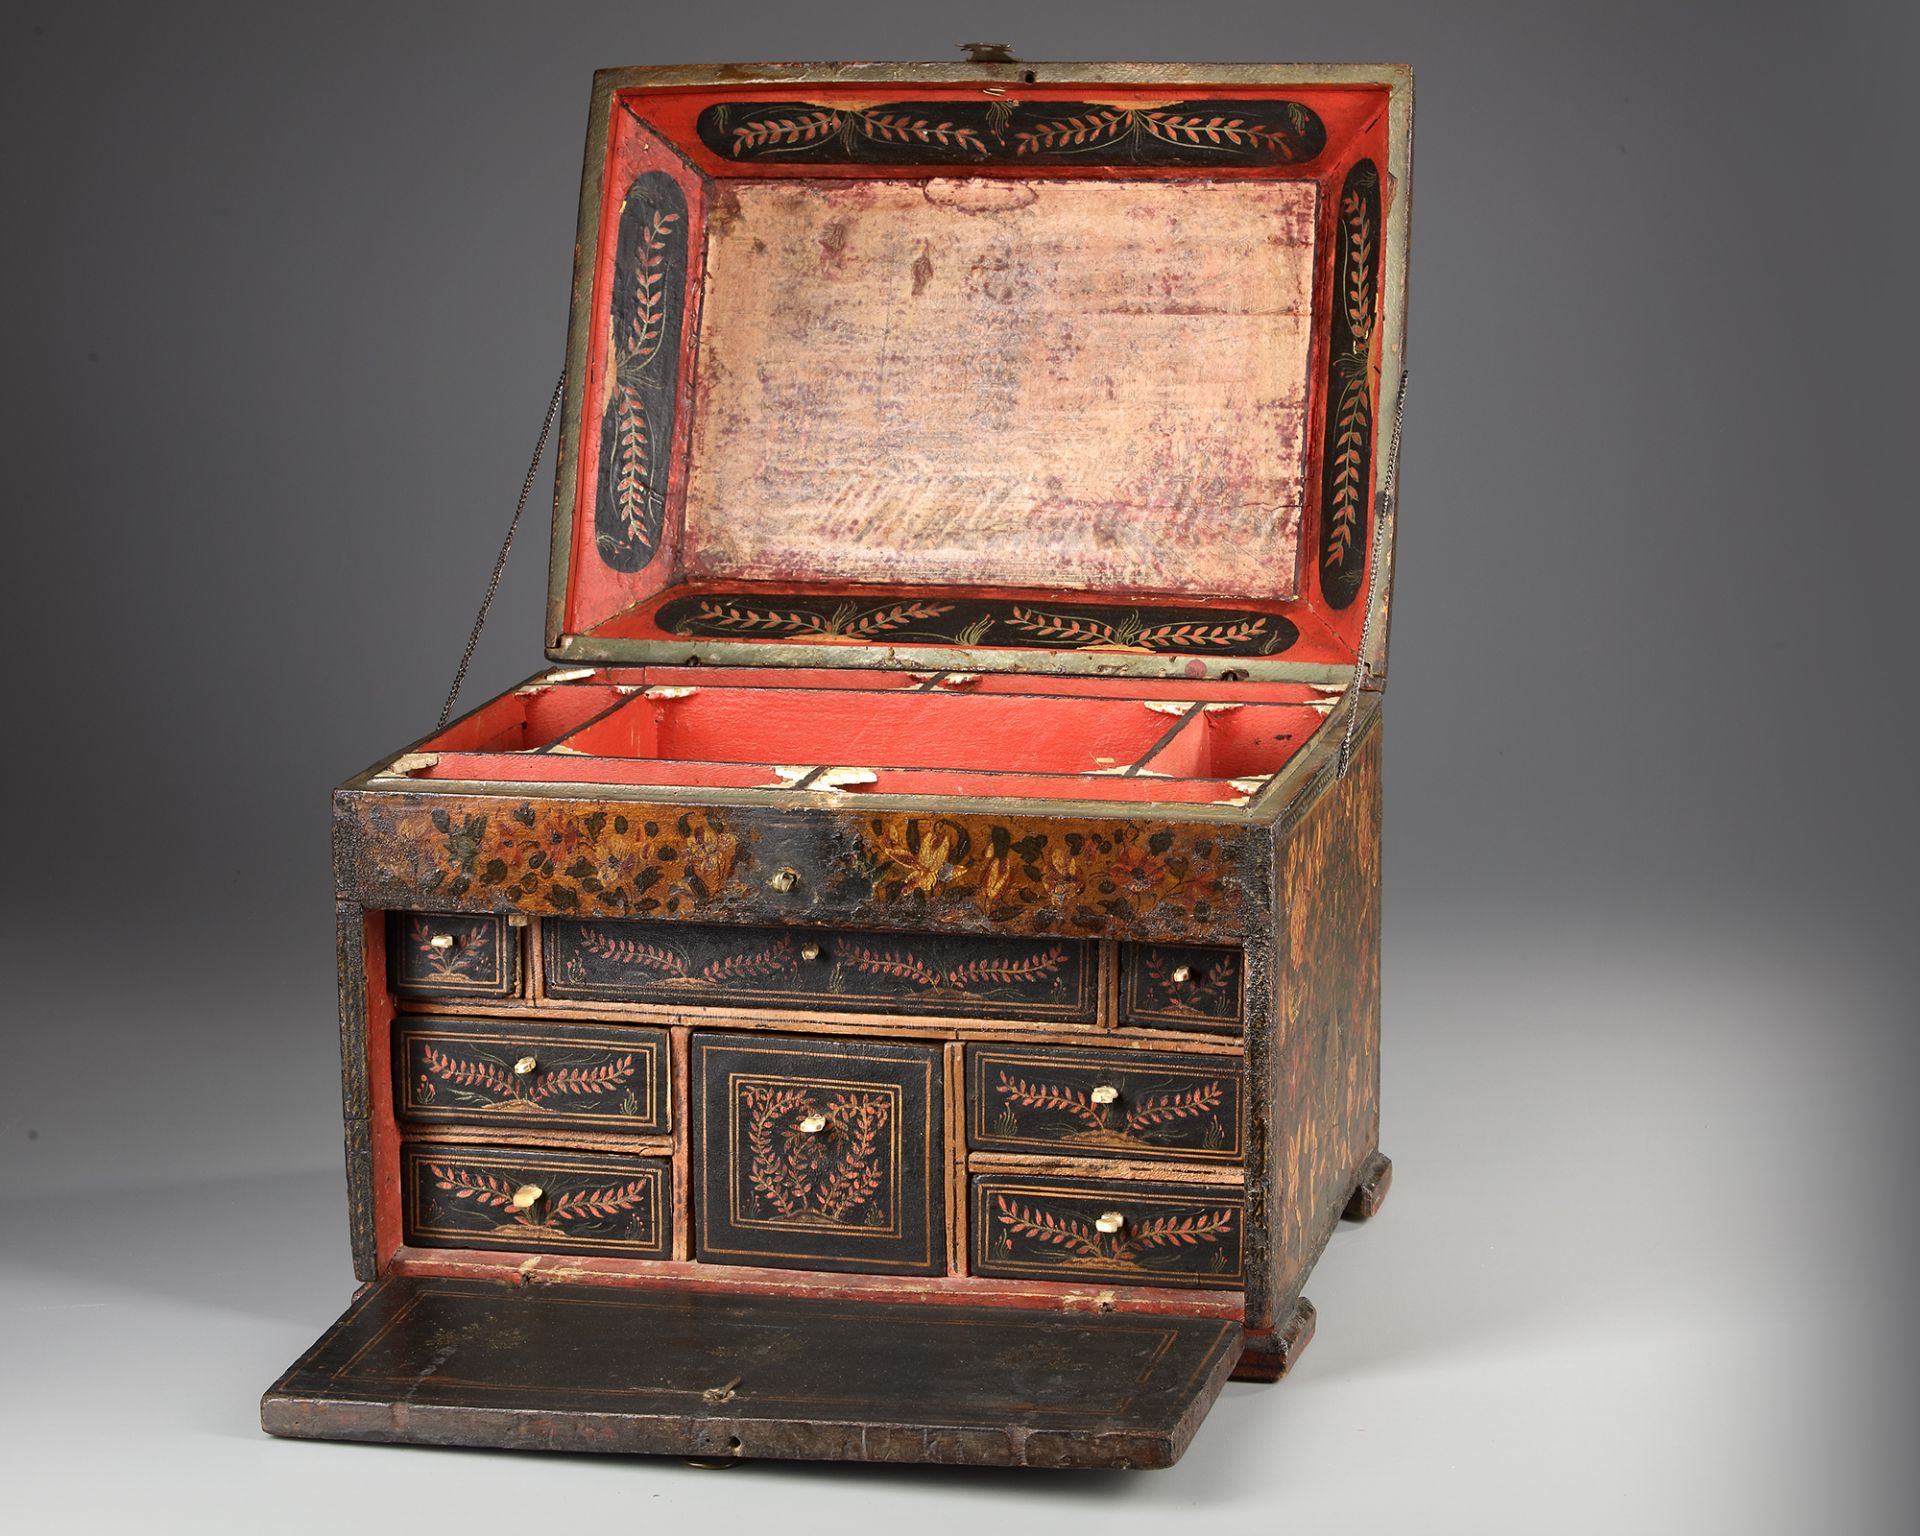 A PERSIAN WOODEN CHEST WITH DRAWERS - Image 3 of 5